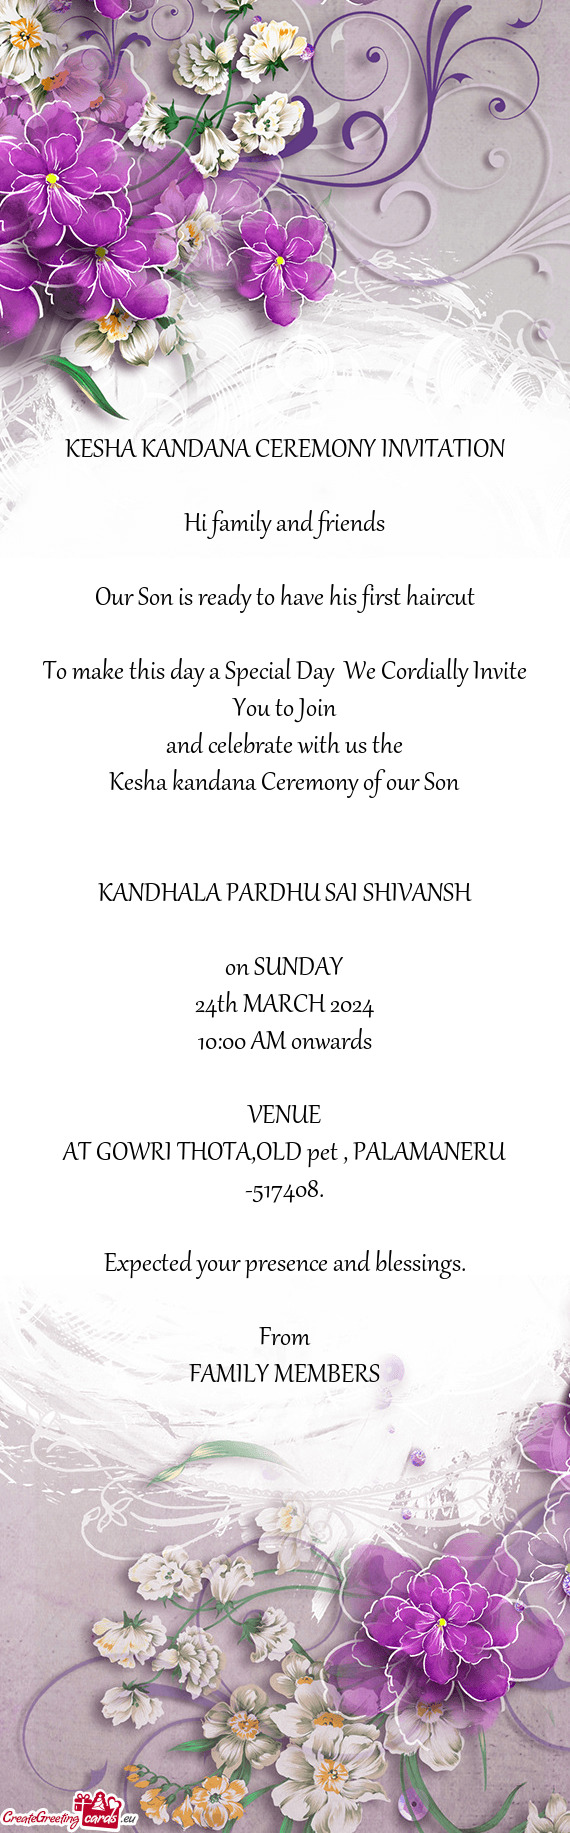 To make this day a Special Day We Cordially Invite You to Join